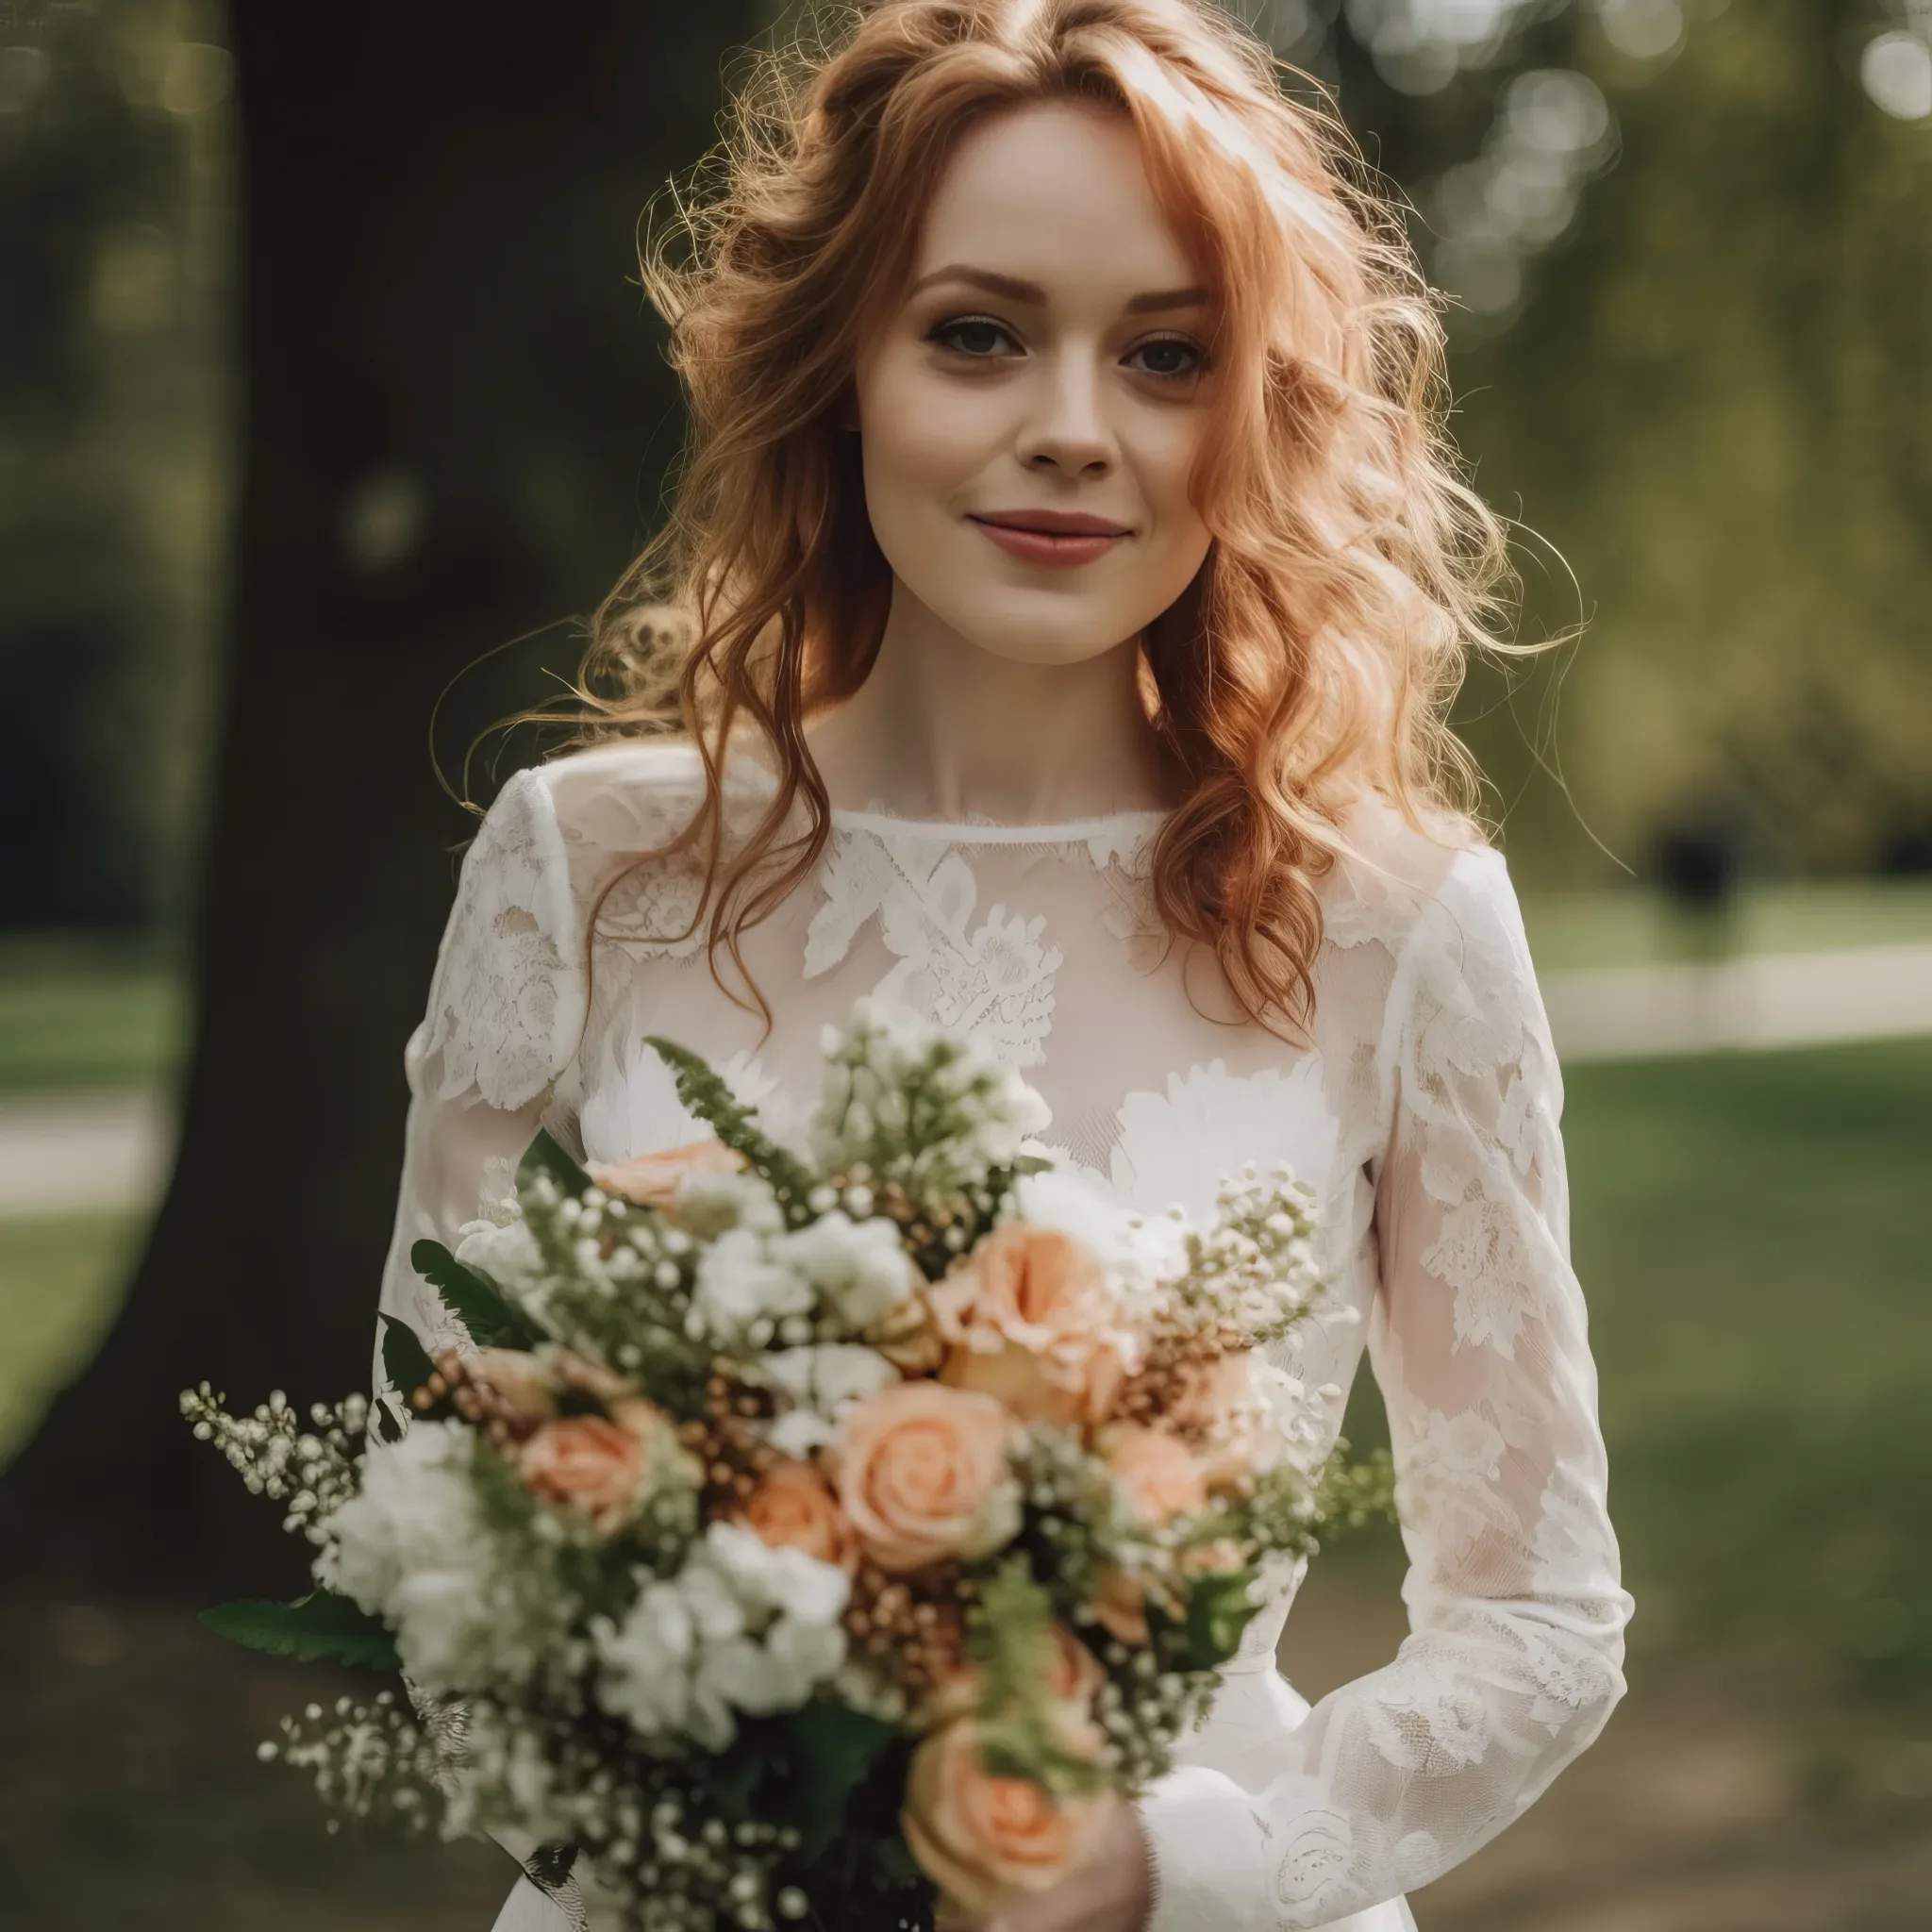 Babington House Wedding Photographer: a woman in a white dress holding a bouquet of flowers.